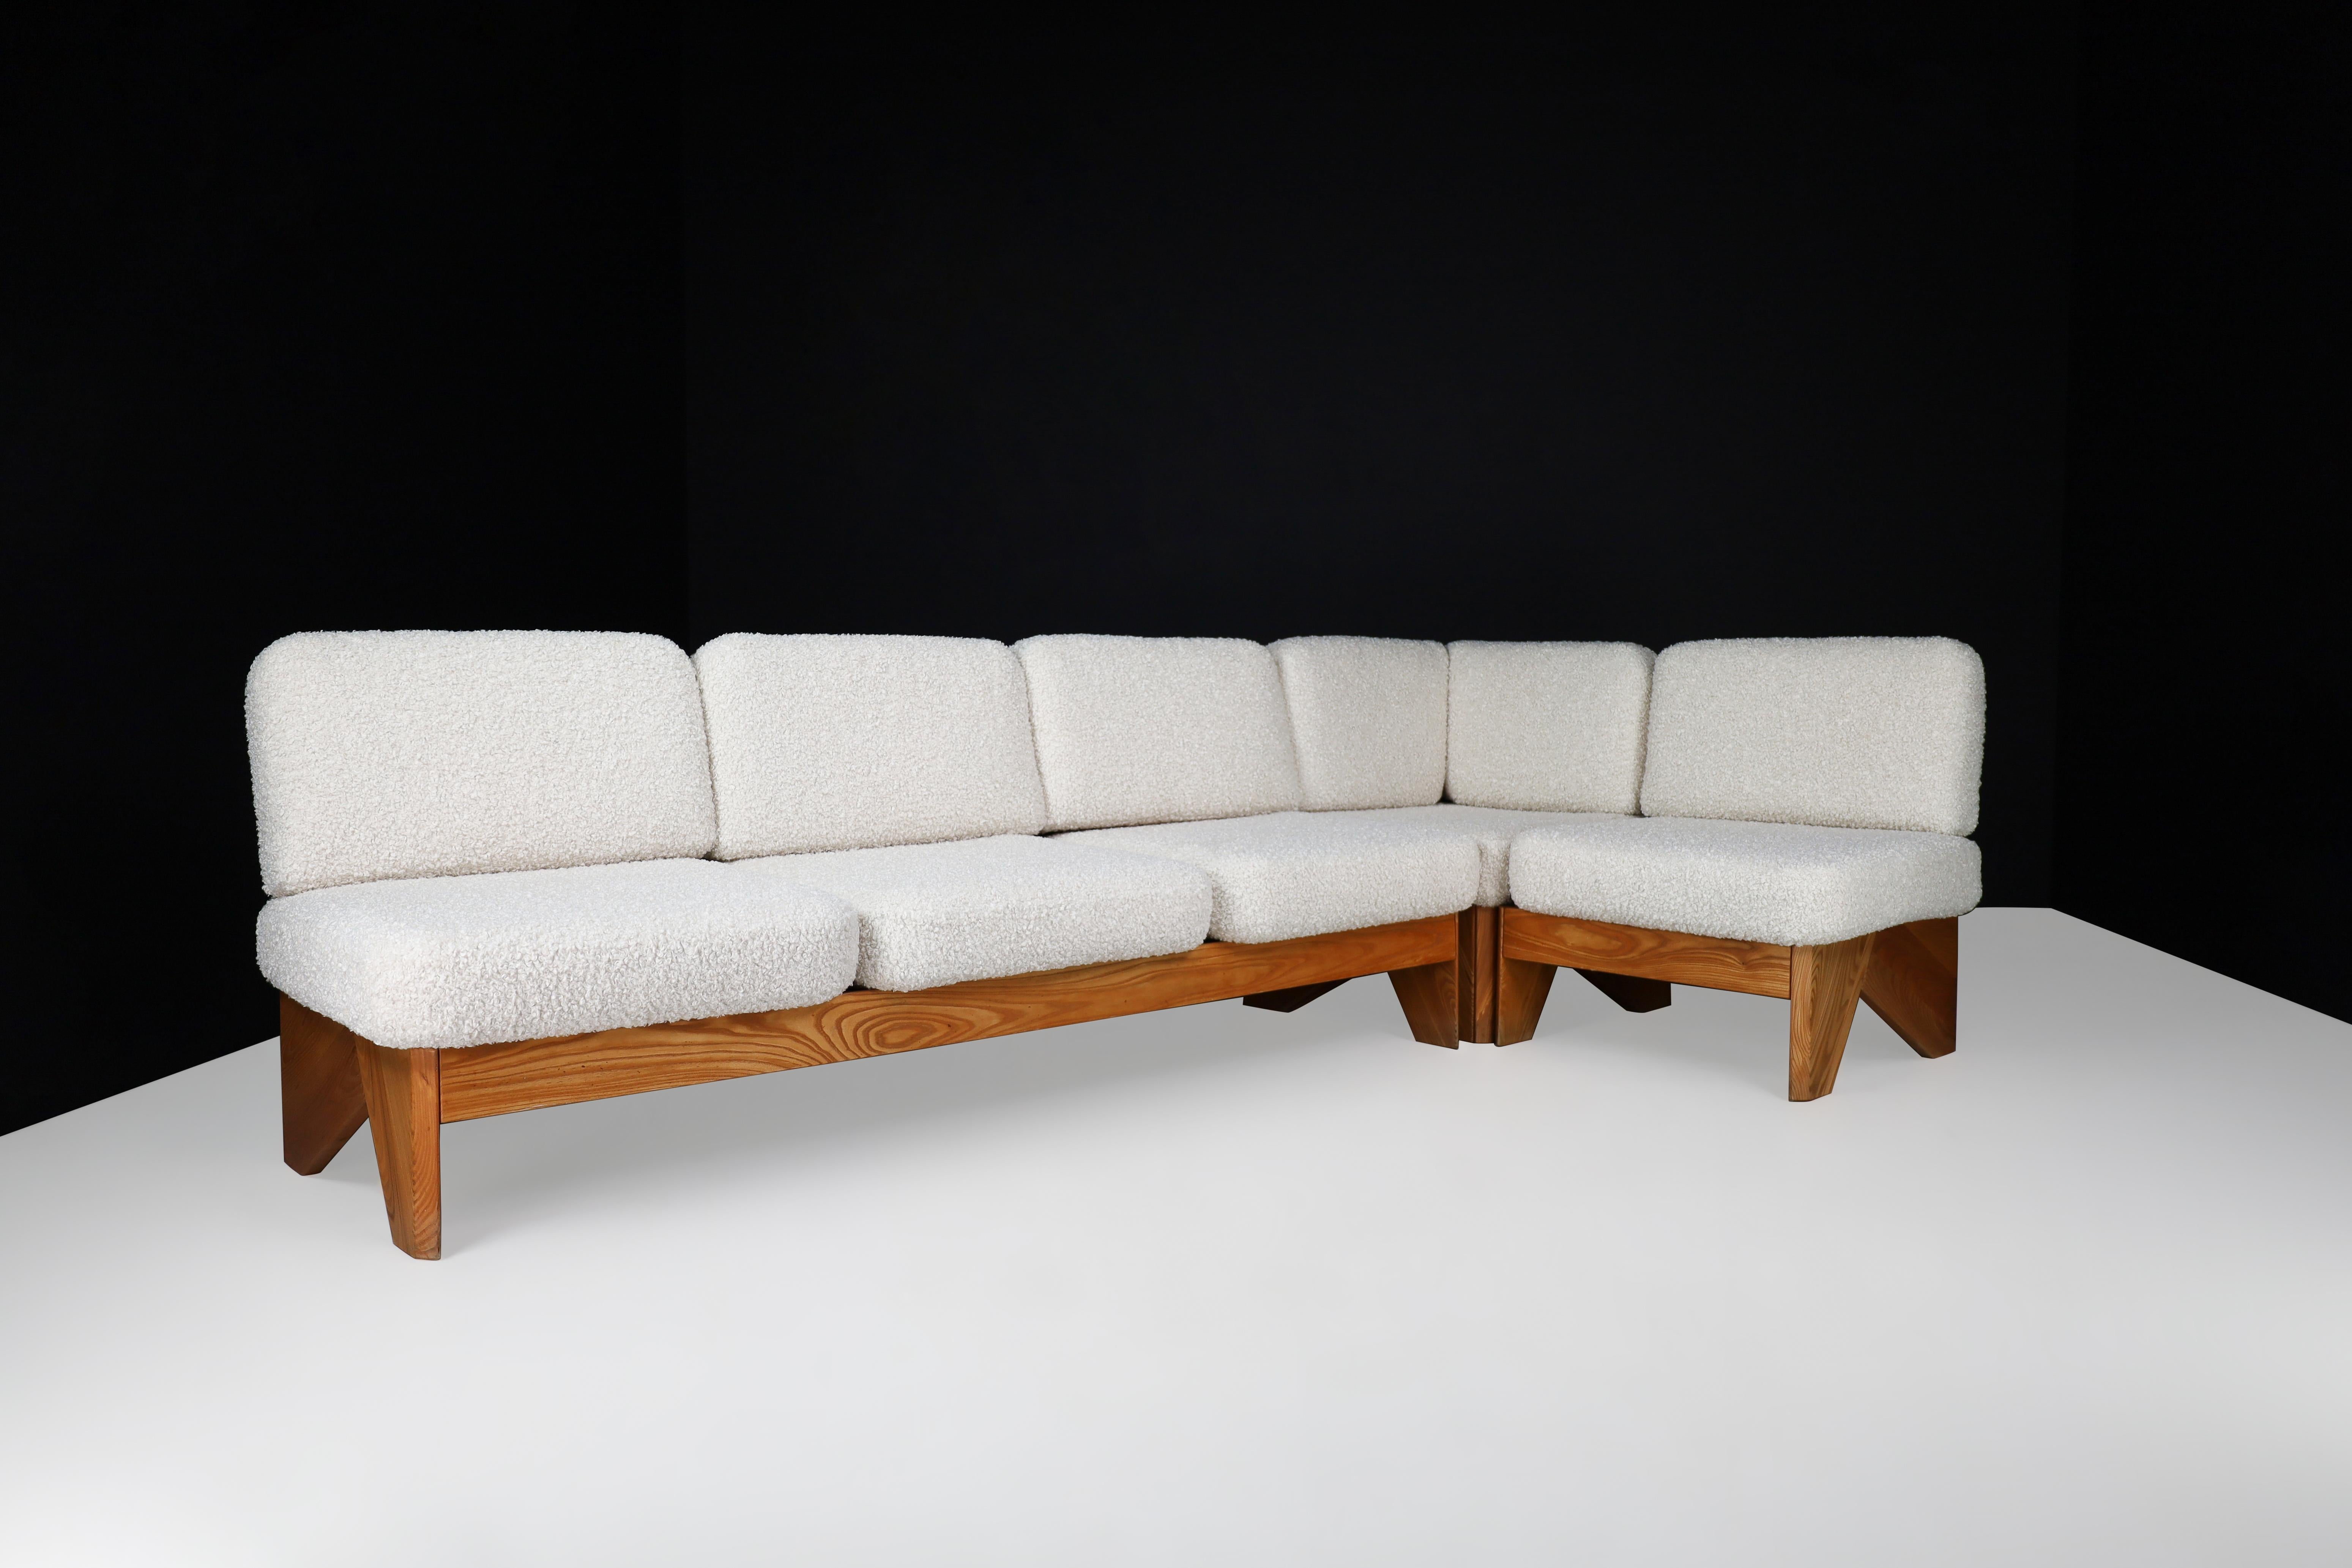 Maison Regain Style Sofa/living room set in Elm and bouclé Fabric, France, 1970s

This is a beautiful Mid-Century Modern Solid Elm Wood Sofa/living room set that was manufactured and designed in France in the 1970s in the style of Maison Regain.